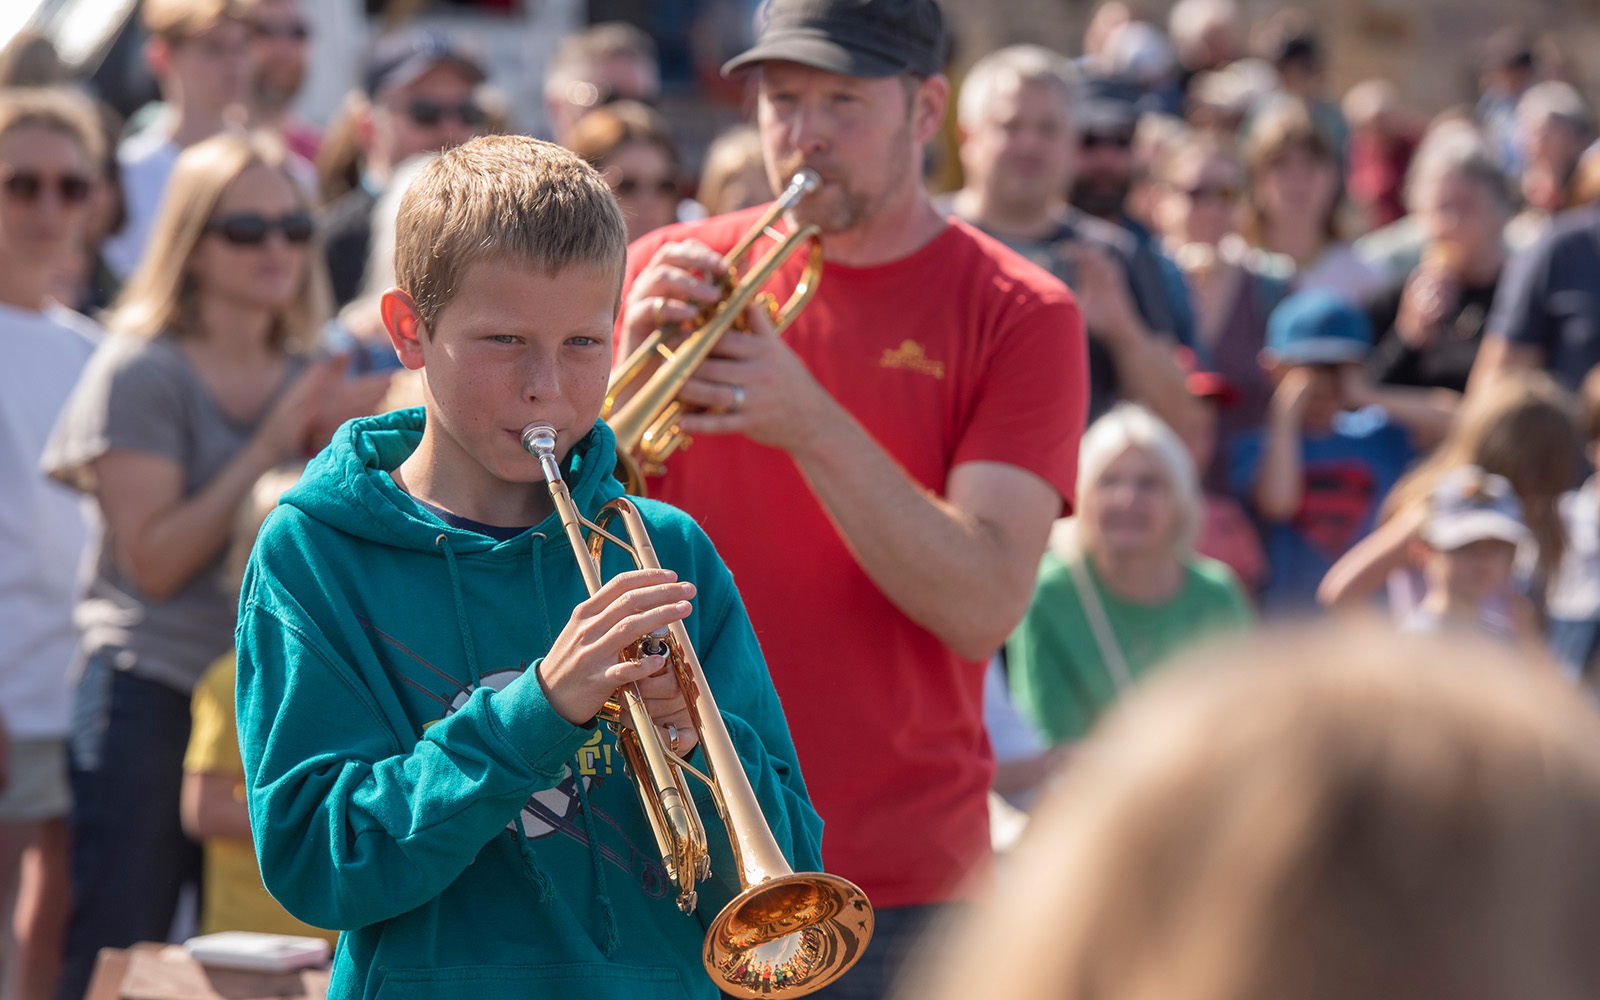 A young boy in a bright blue hoodie playing a trumpet